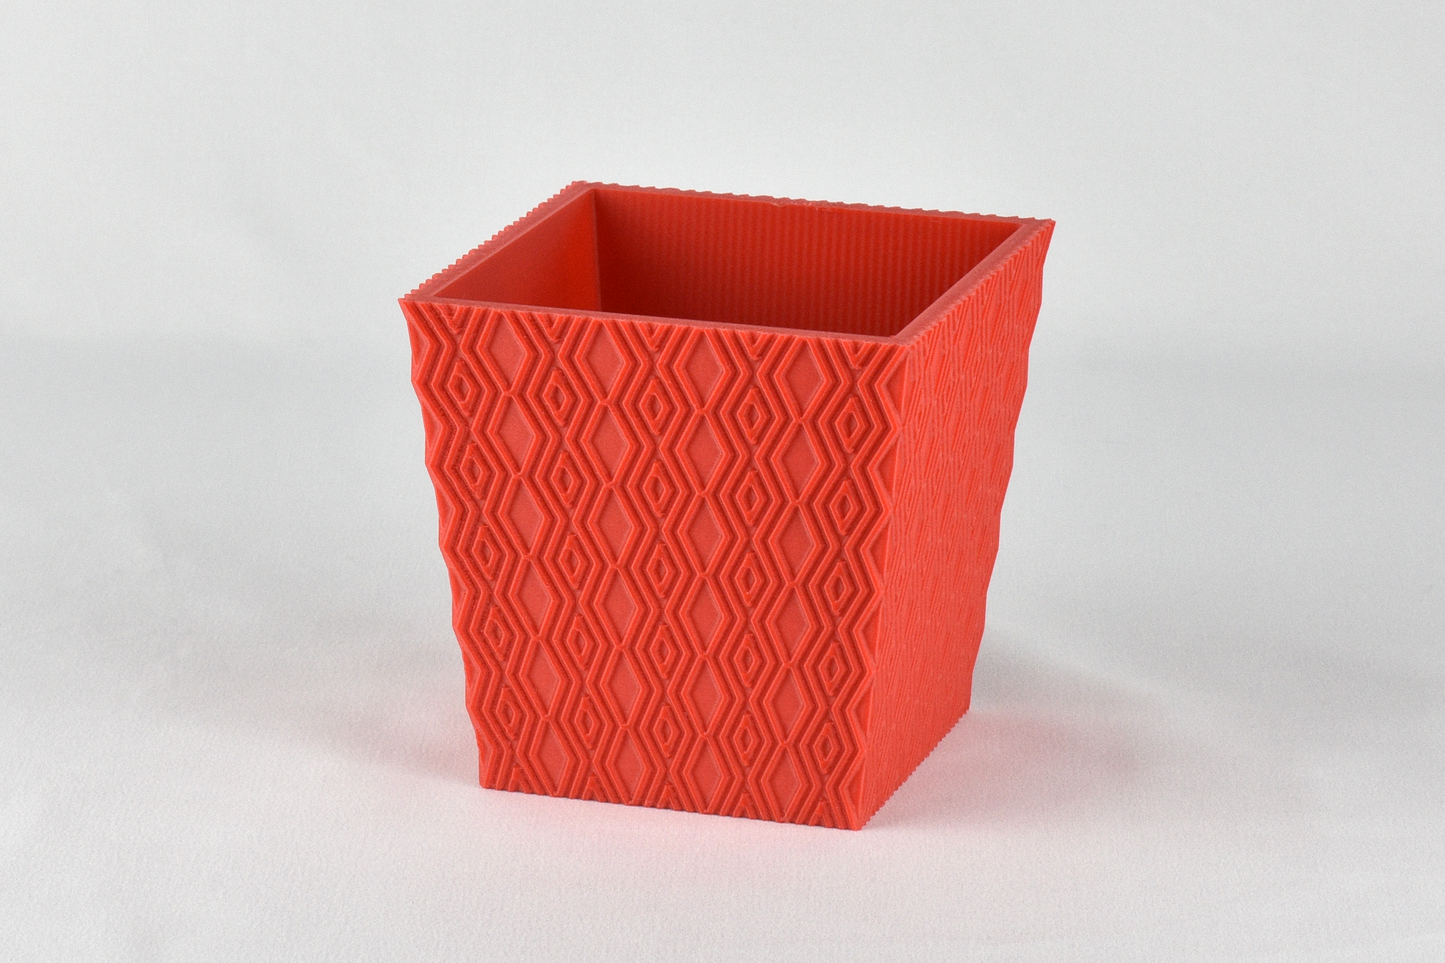 4-inch Square Planter, Geometric Pattern #4, Drainage and Optional Tray, Outdoor Safe